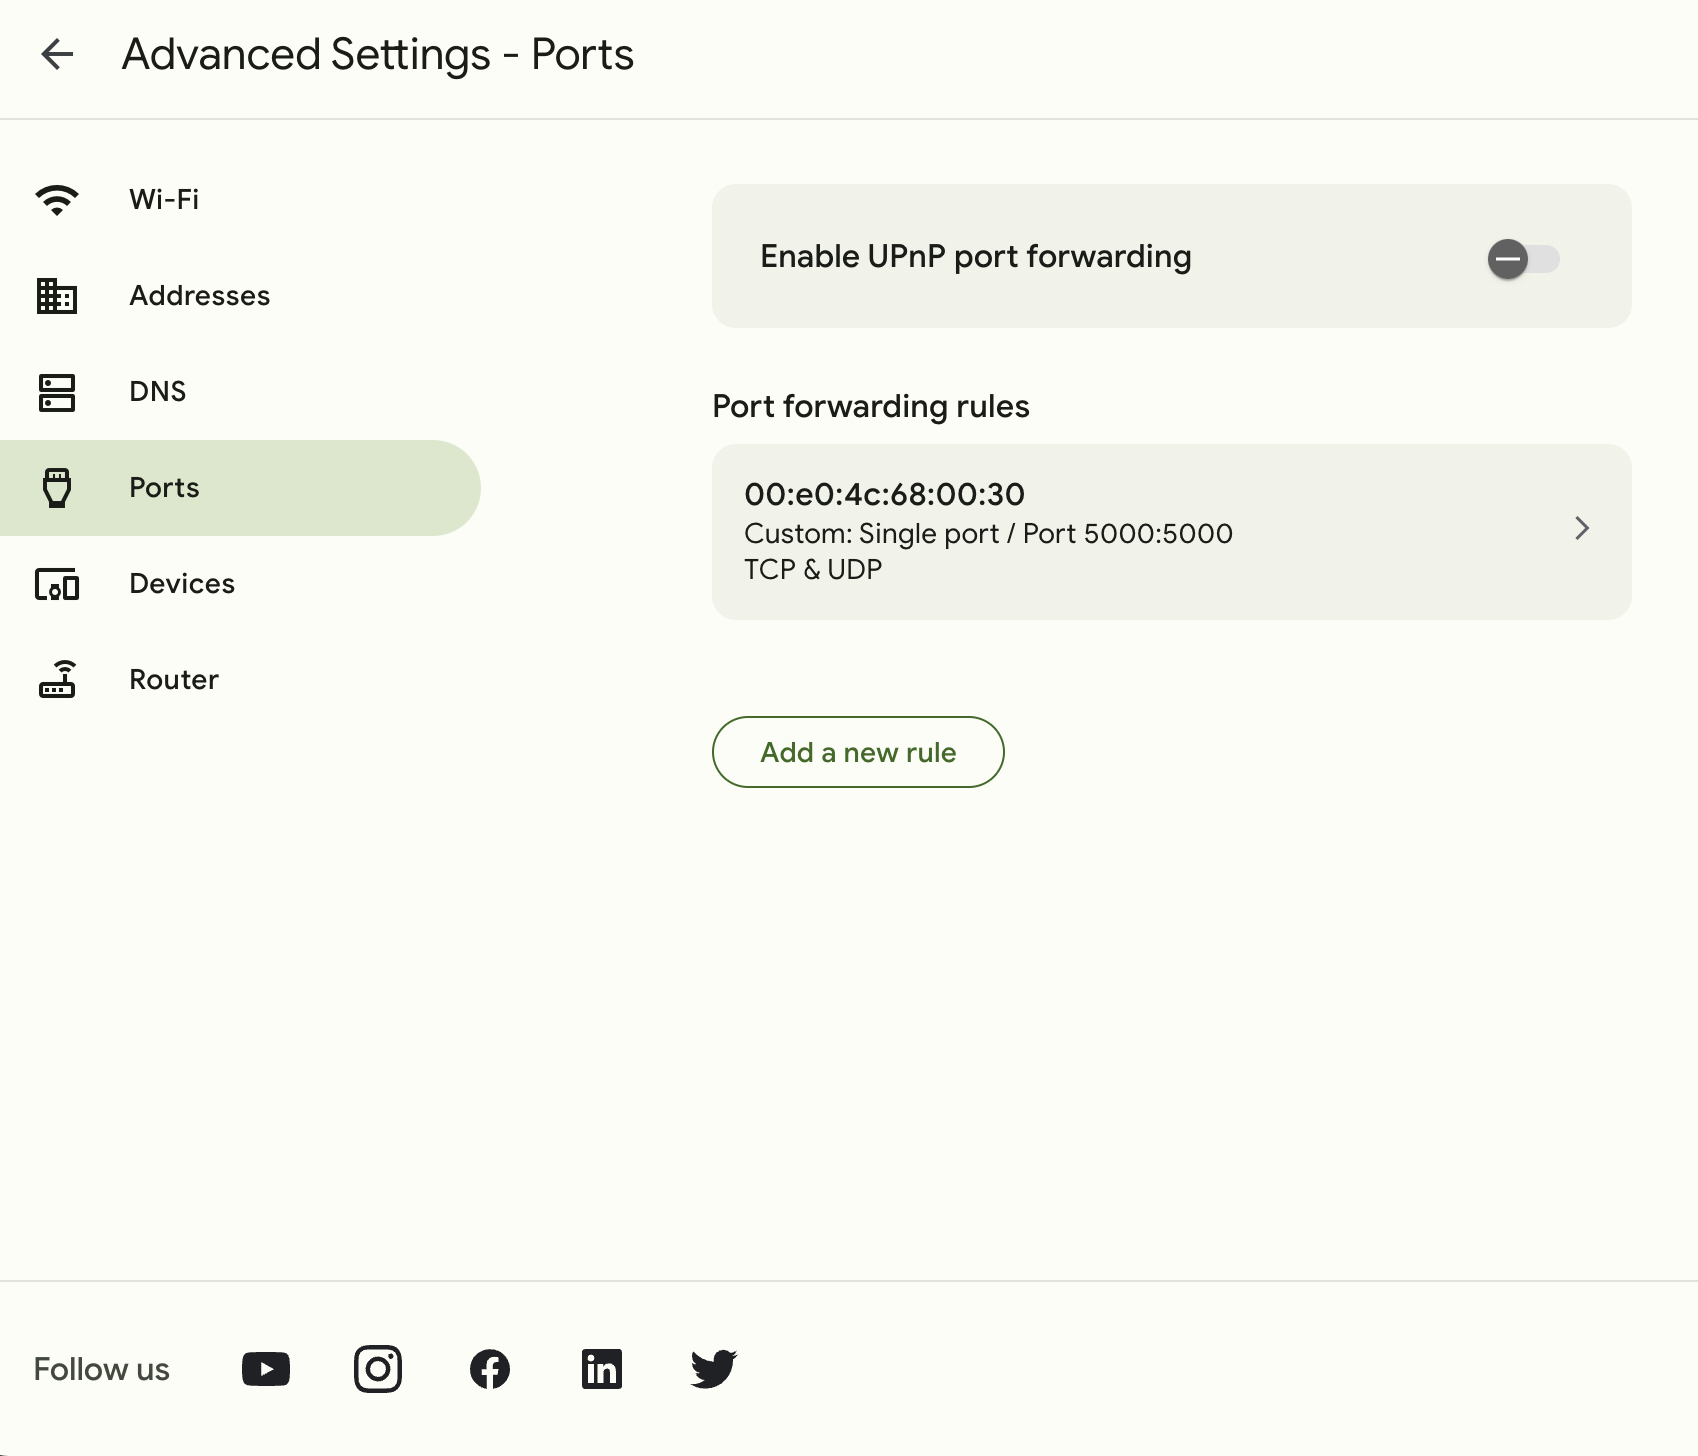 The "Ports" section of the GFiber portal Advanced Settings page. The user has the option to enable UPnP port forwarding, or to add/edit port forwarding rules.